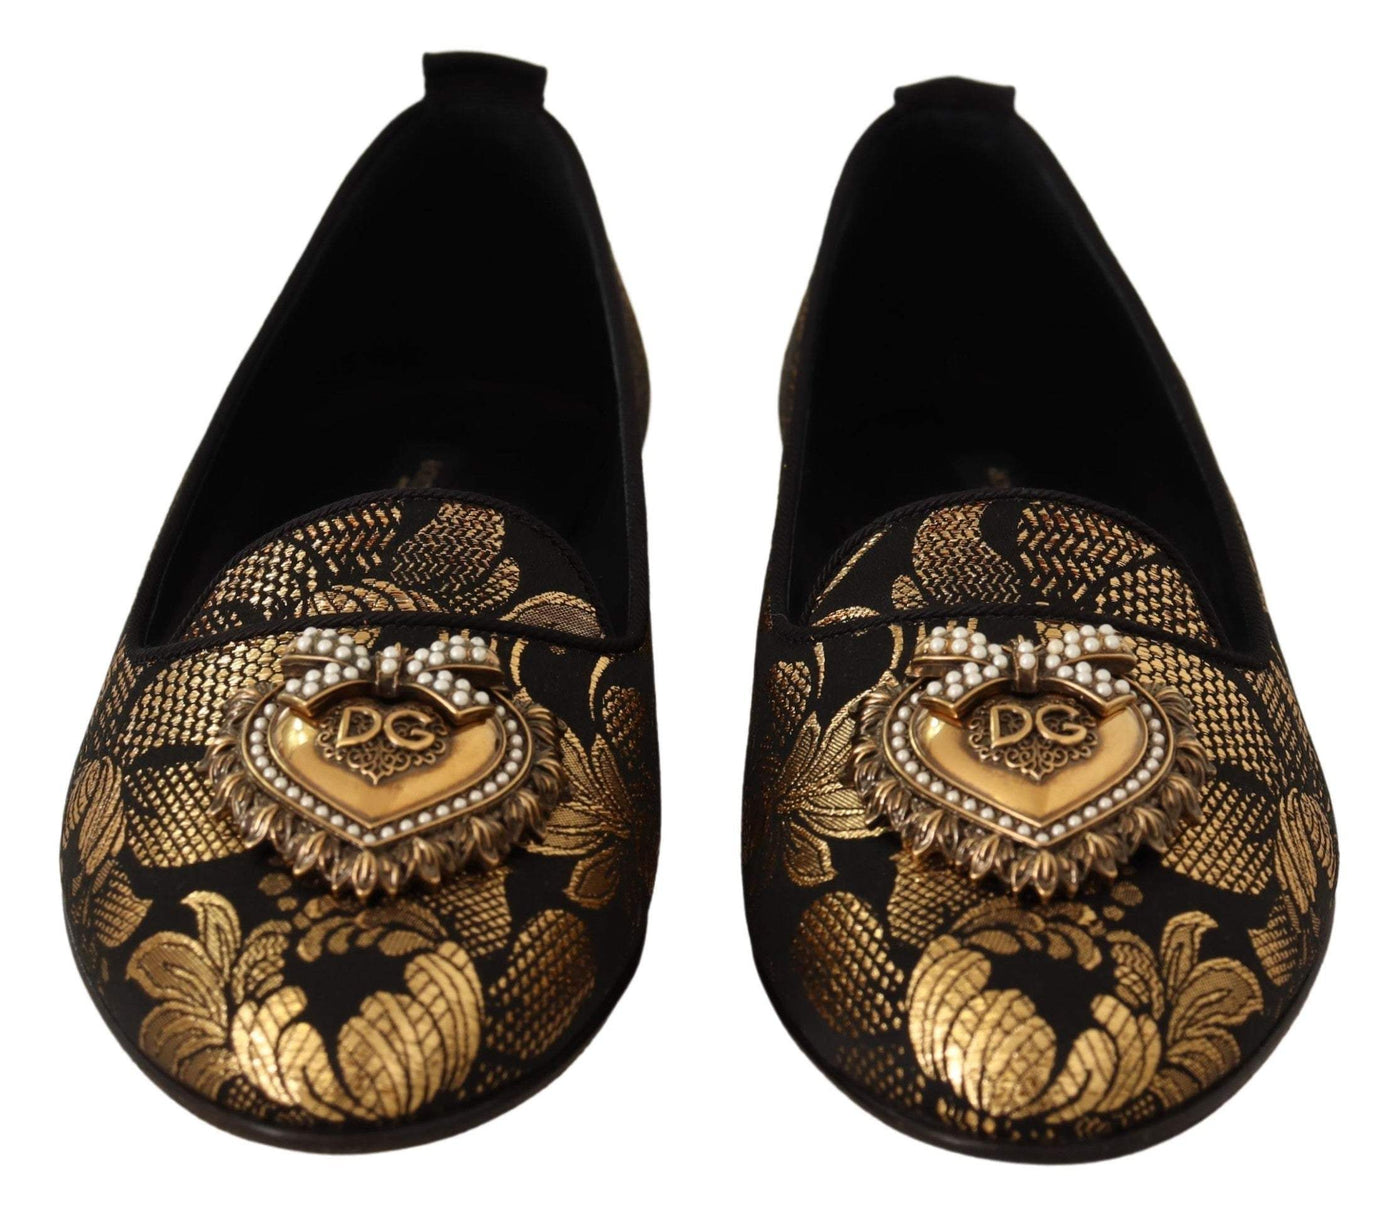 Dolce & Gabbana Black Gold Amore Heart Loafers Flats Shoes #women, Dolce & Gabbana, EU35/US4.5, EU36.5/US6, EU37.5/US7, EU40/US9.5, feed-agegroup-adult, feed-color-Black, feed-gender-female, Flat Shoes - Women - Shoes, Gold Black at SEYMAYKA